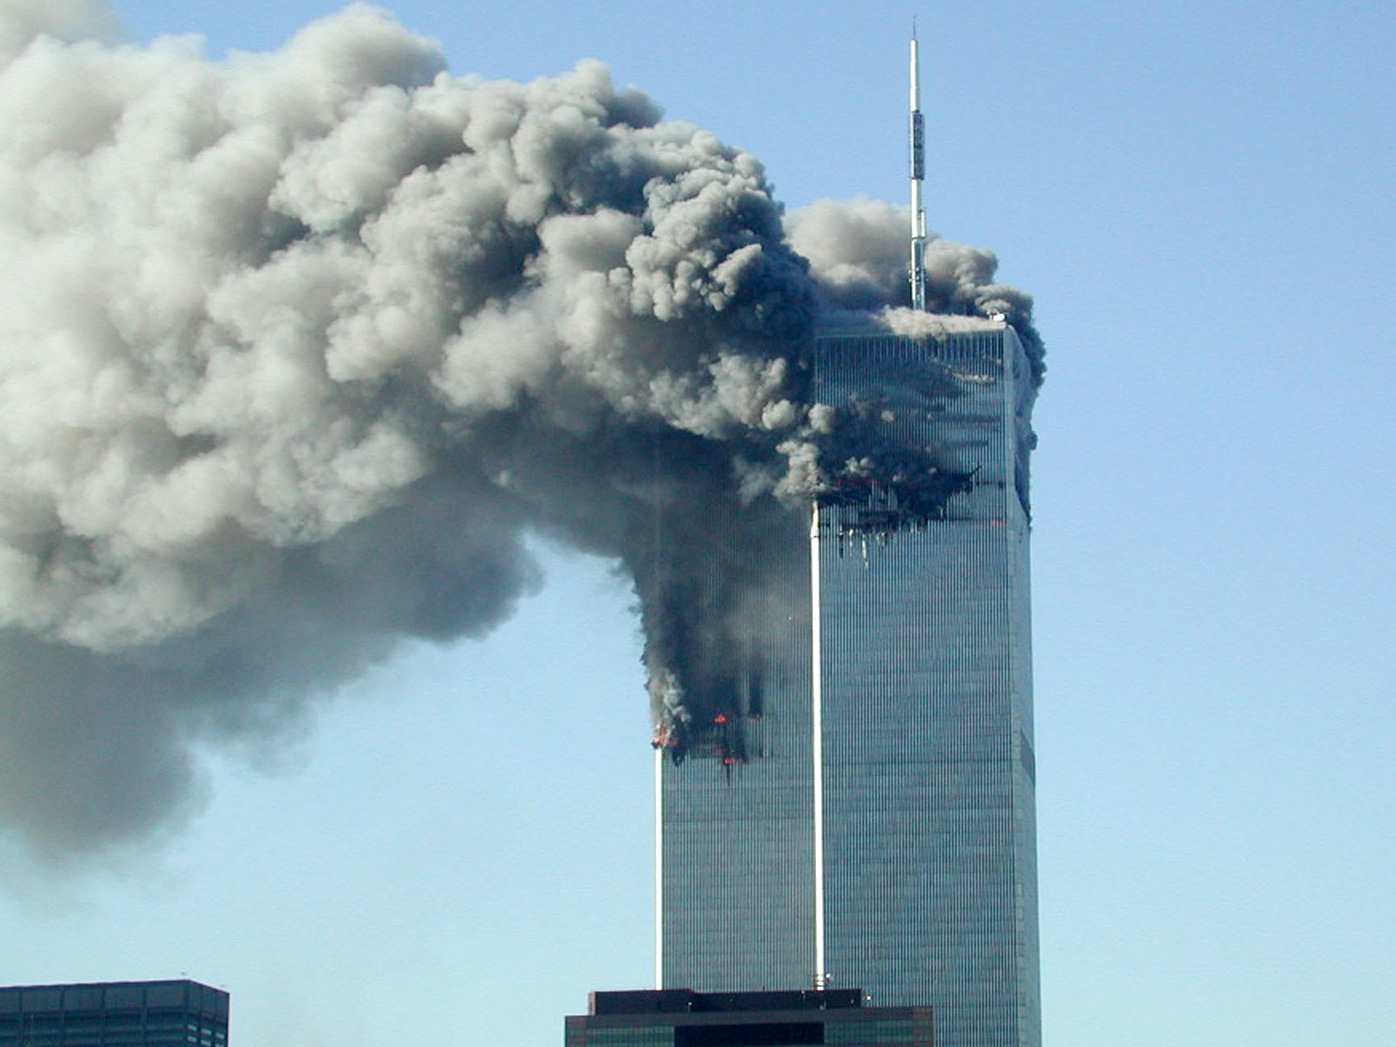 Smoke pours from the World Trade Center after being hit by two planes on the morning of September 11, 2001.